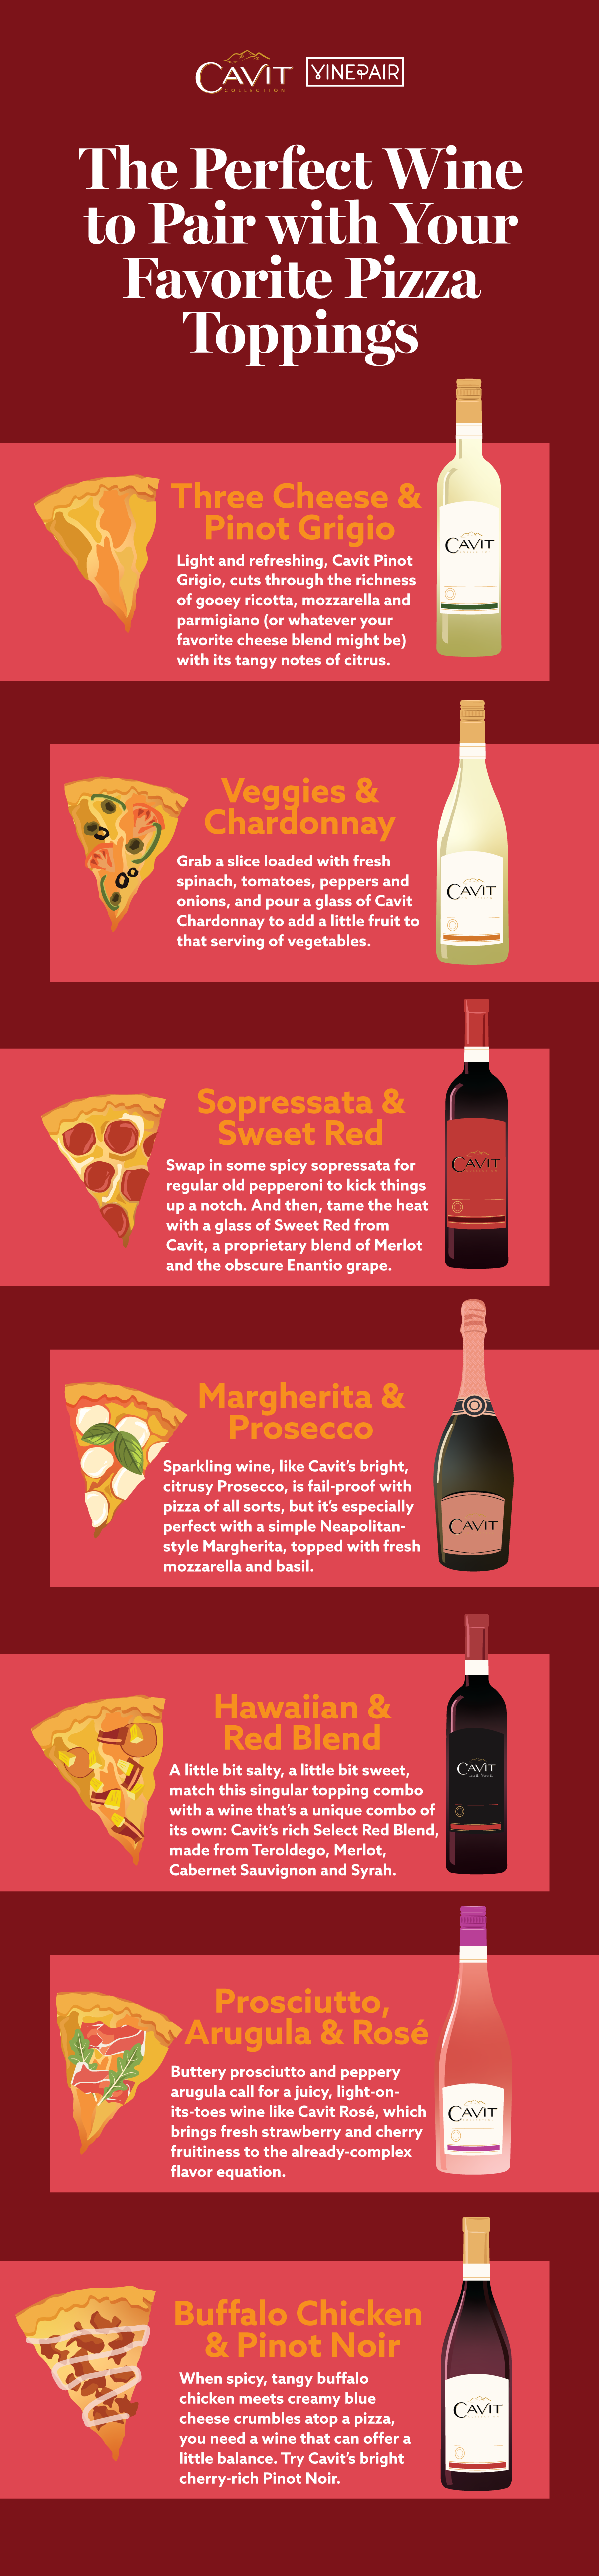 The Perfect Wine to Pair With Your Favorite Pizza Toppings